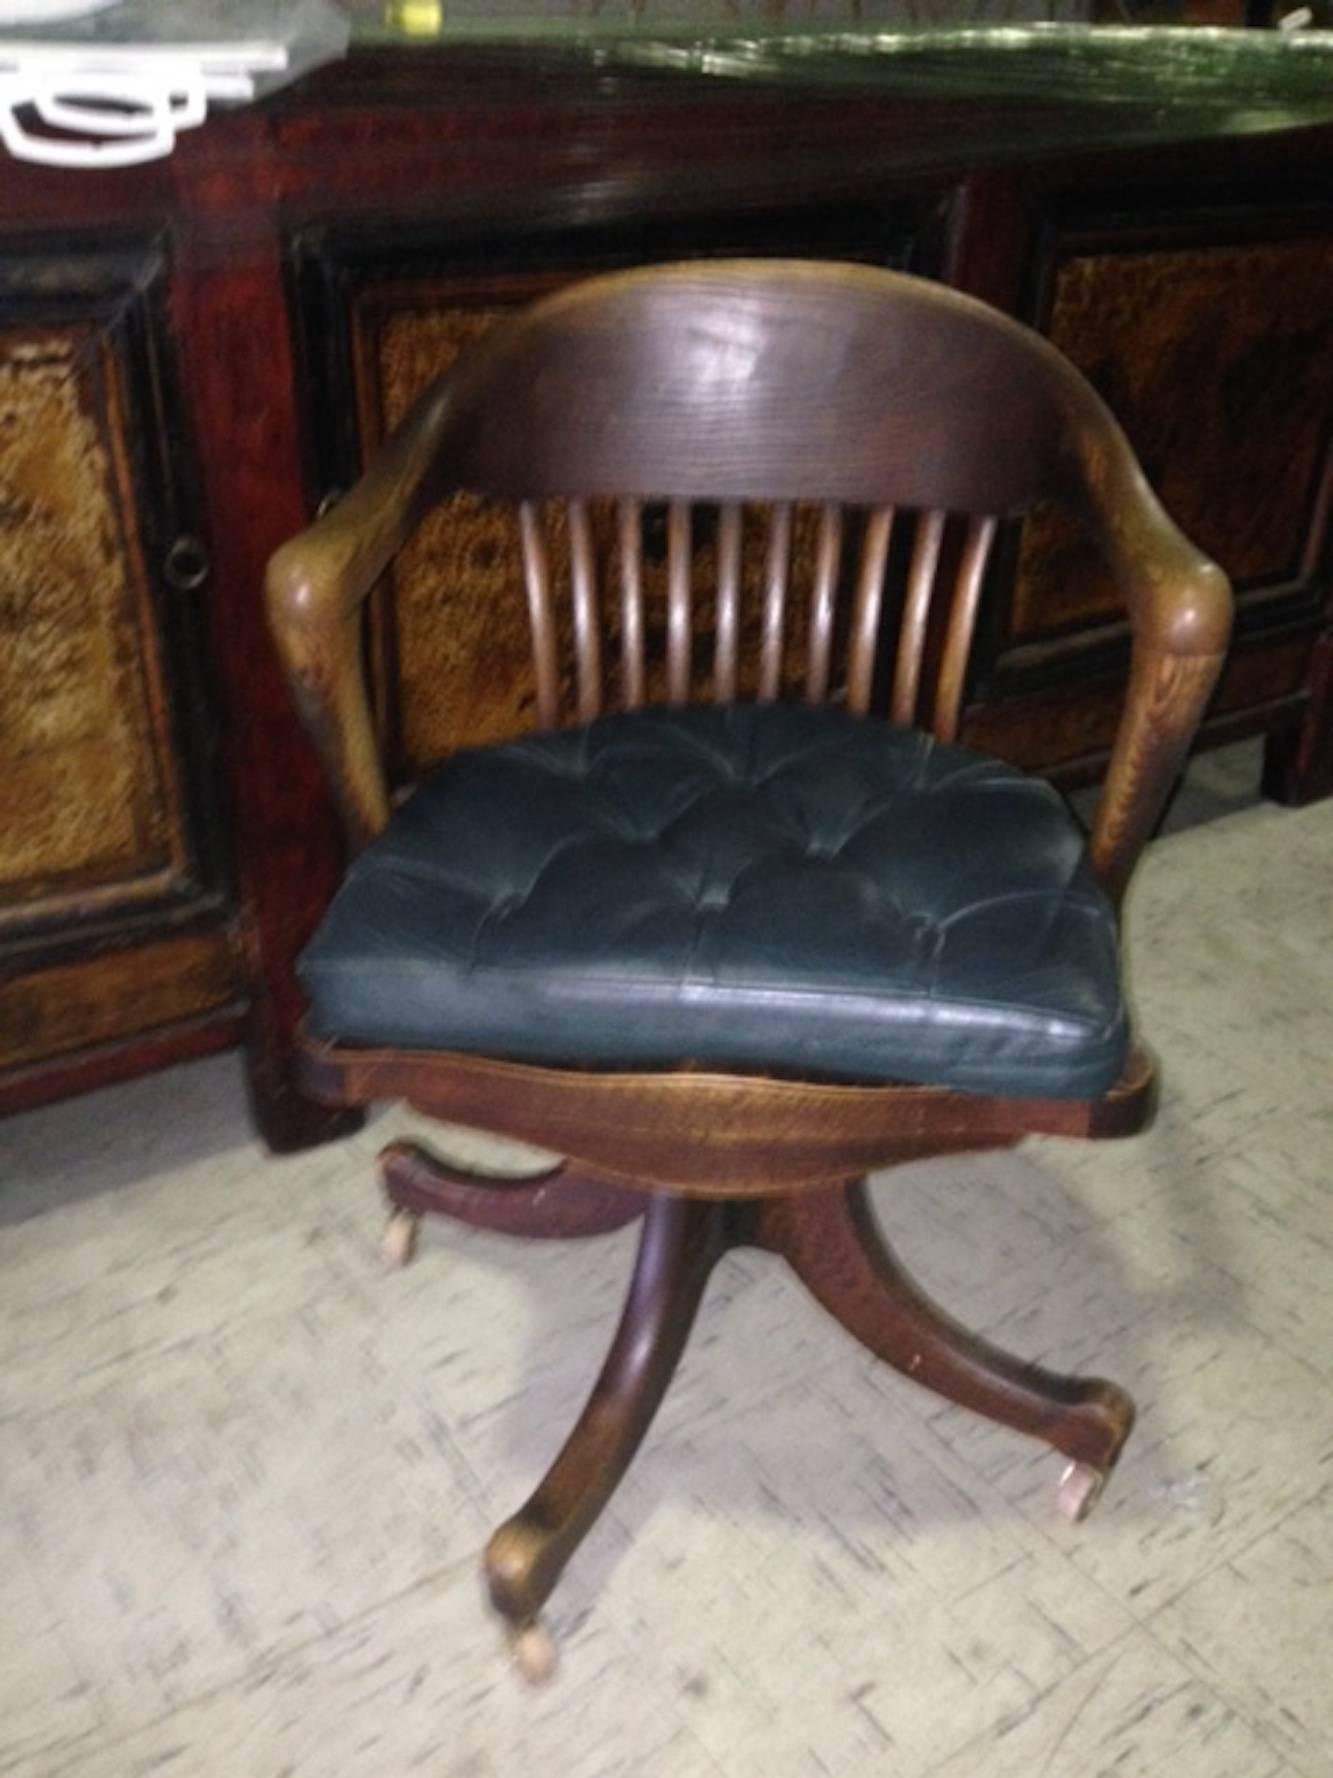 19th century American oak desk chair from railroad station, swivel, tilt. Great old color and patina.